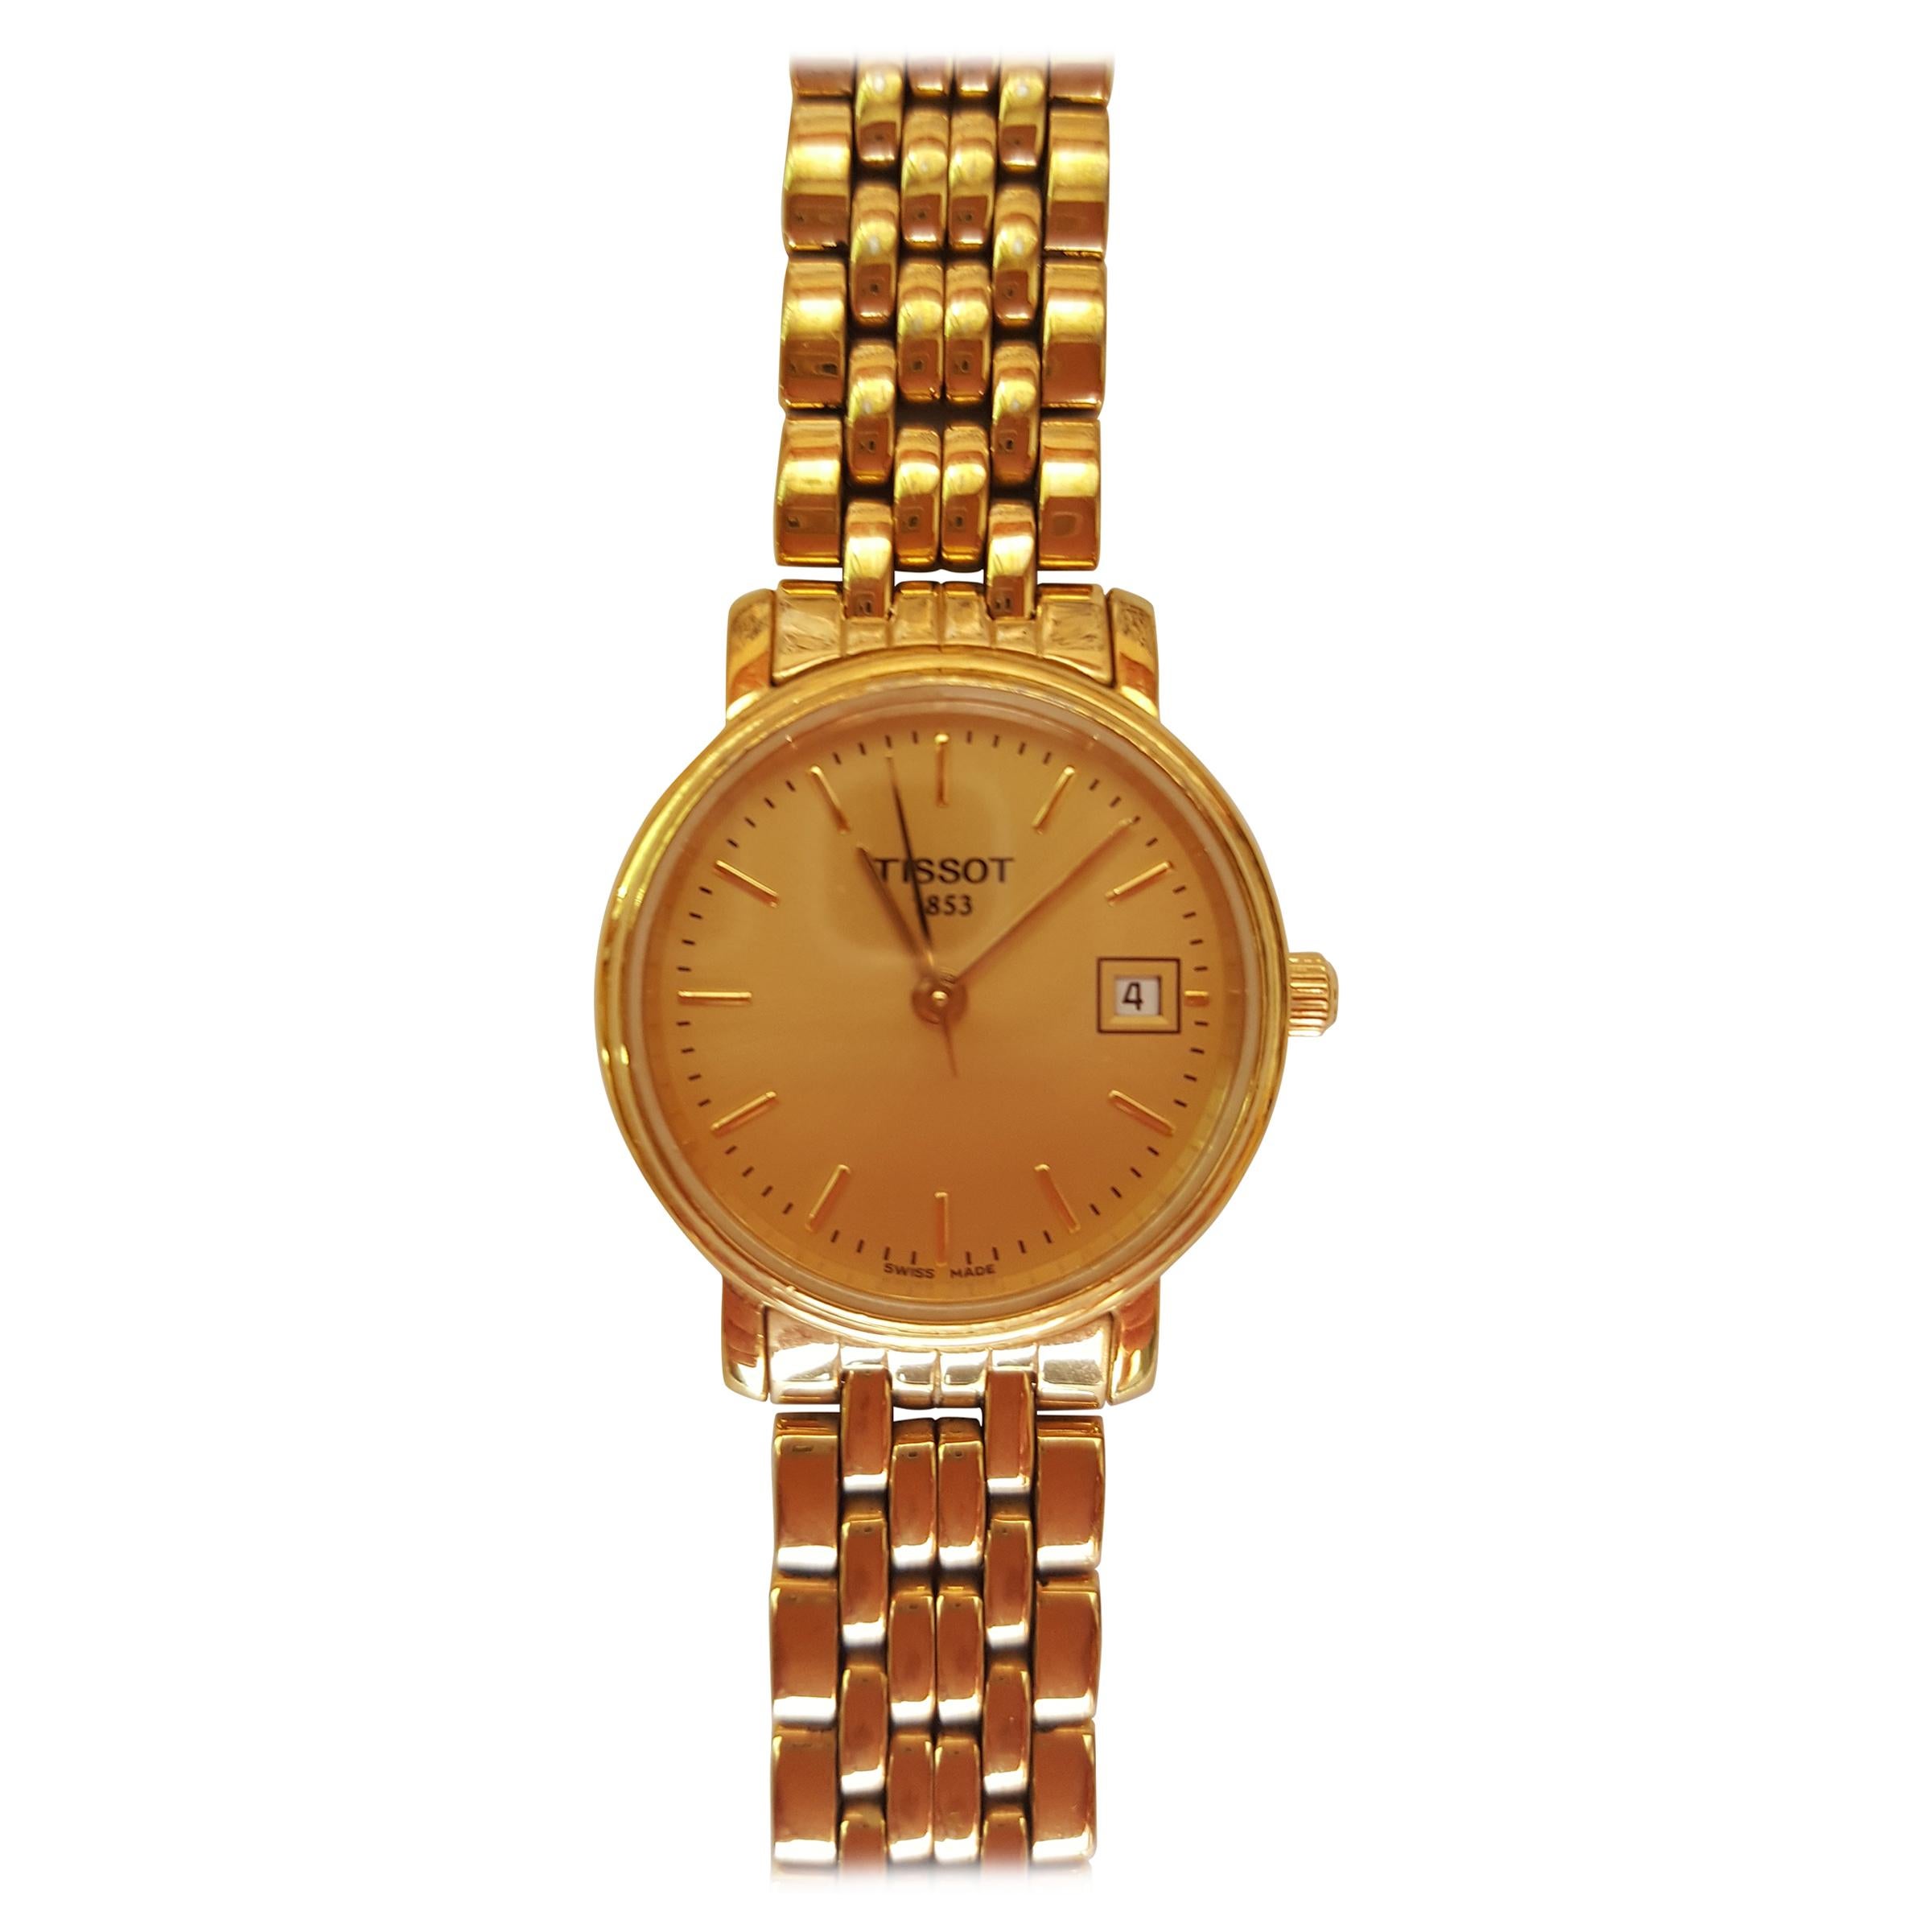 Ladies Tissot Watch Gold-Plated Stainless Steel Water Resistant